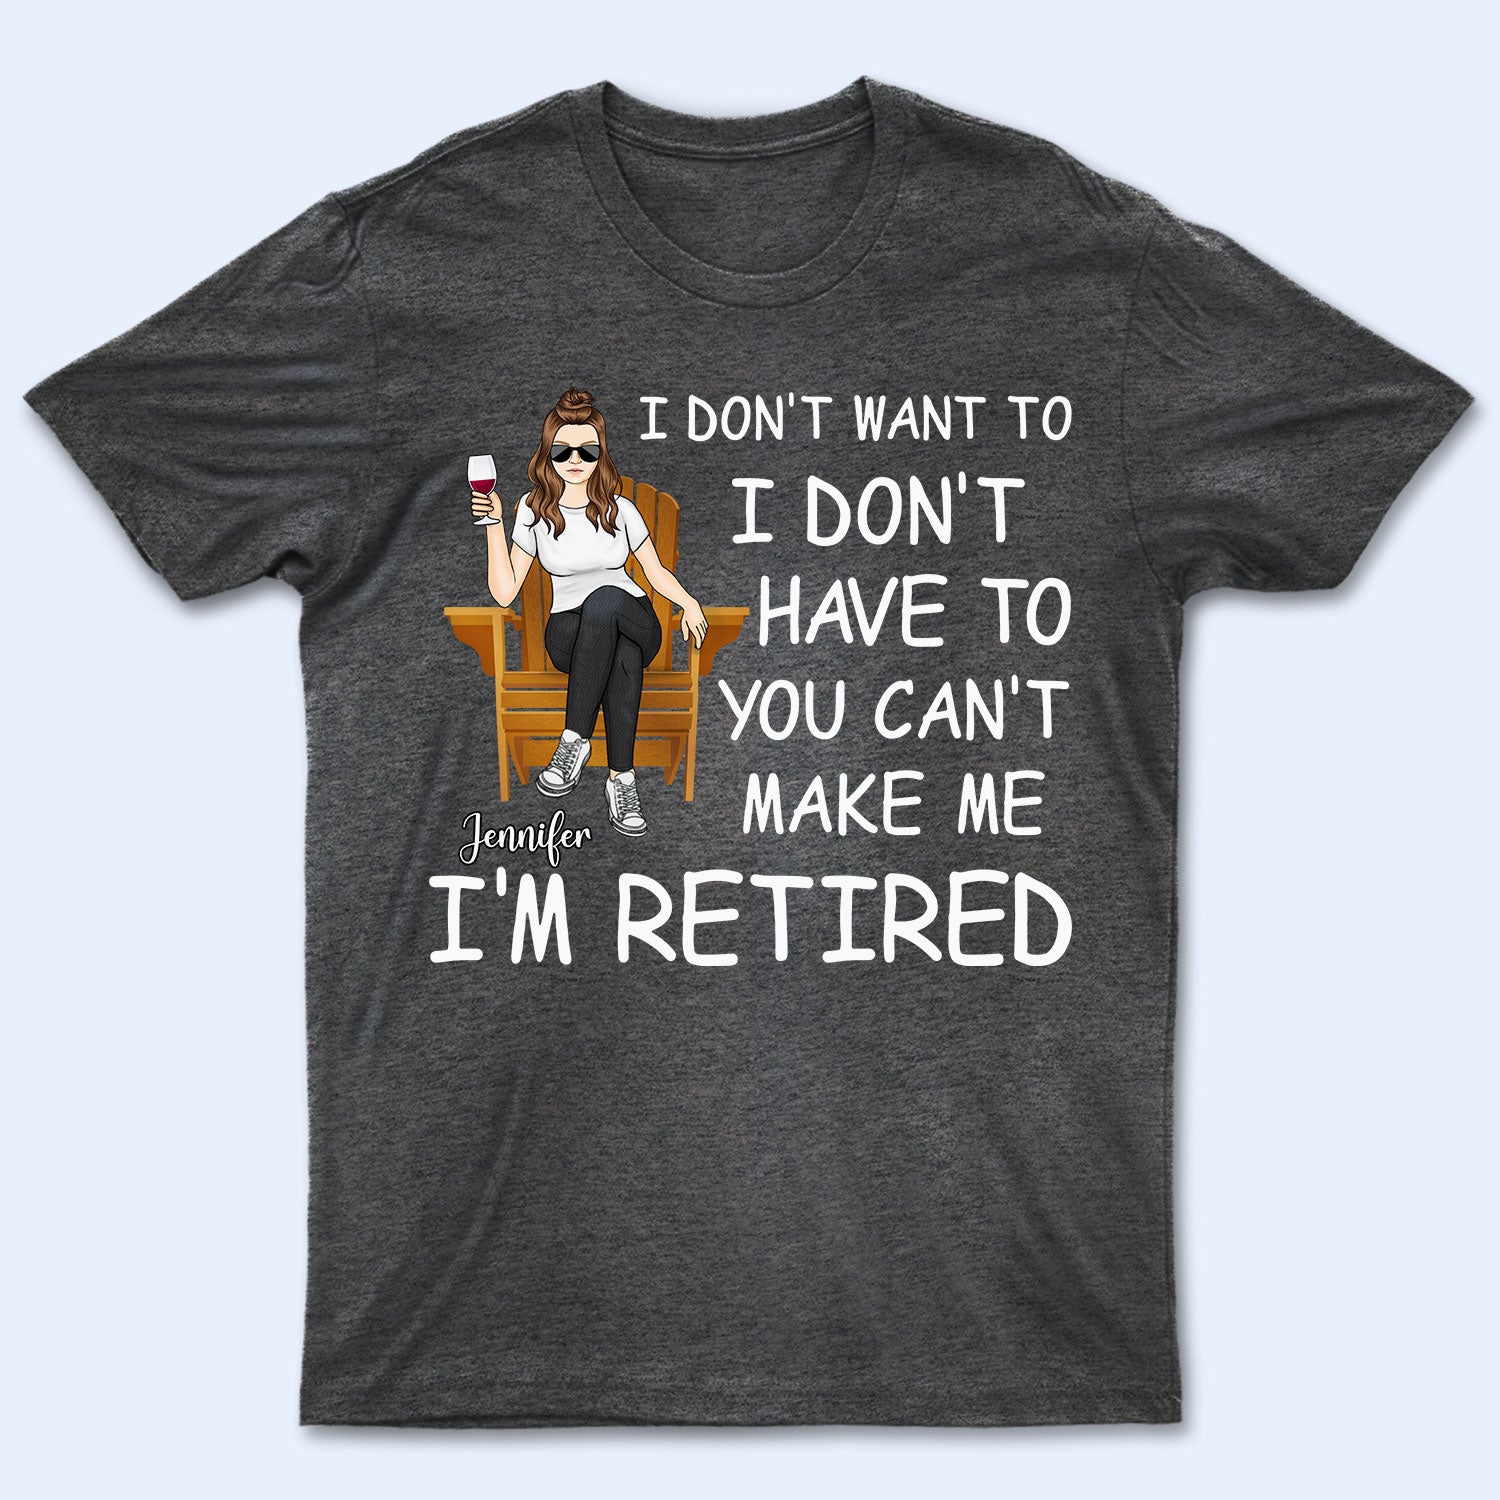 I'm Retired You Can't Make Me - Gift For Grandma, Grandpa, Retirement Gift - Personalized T Shirt